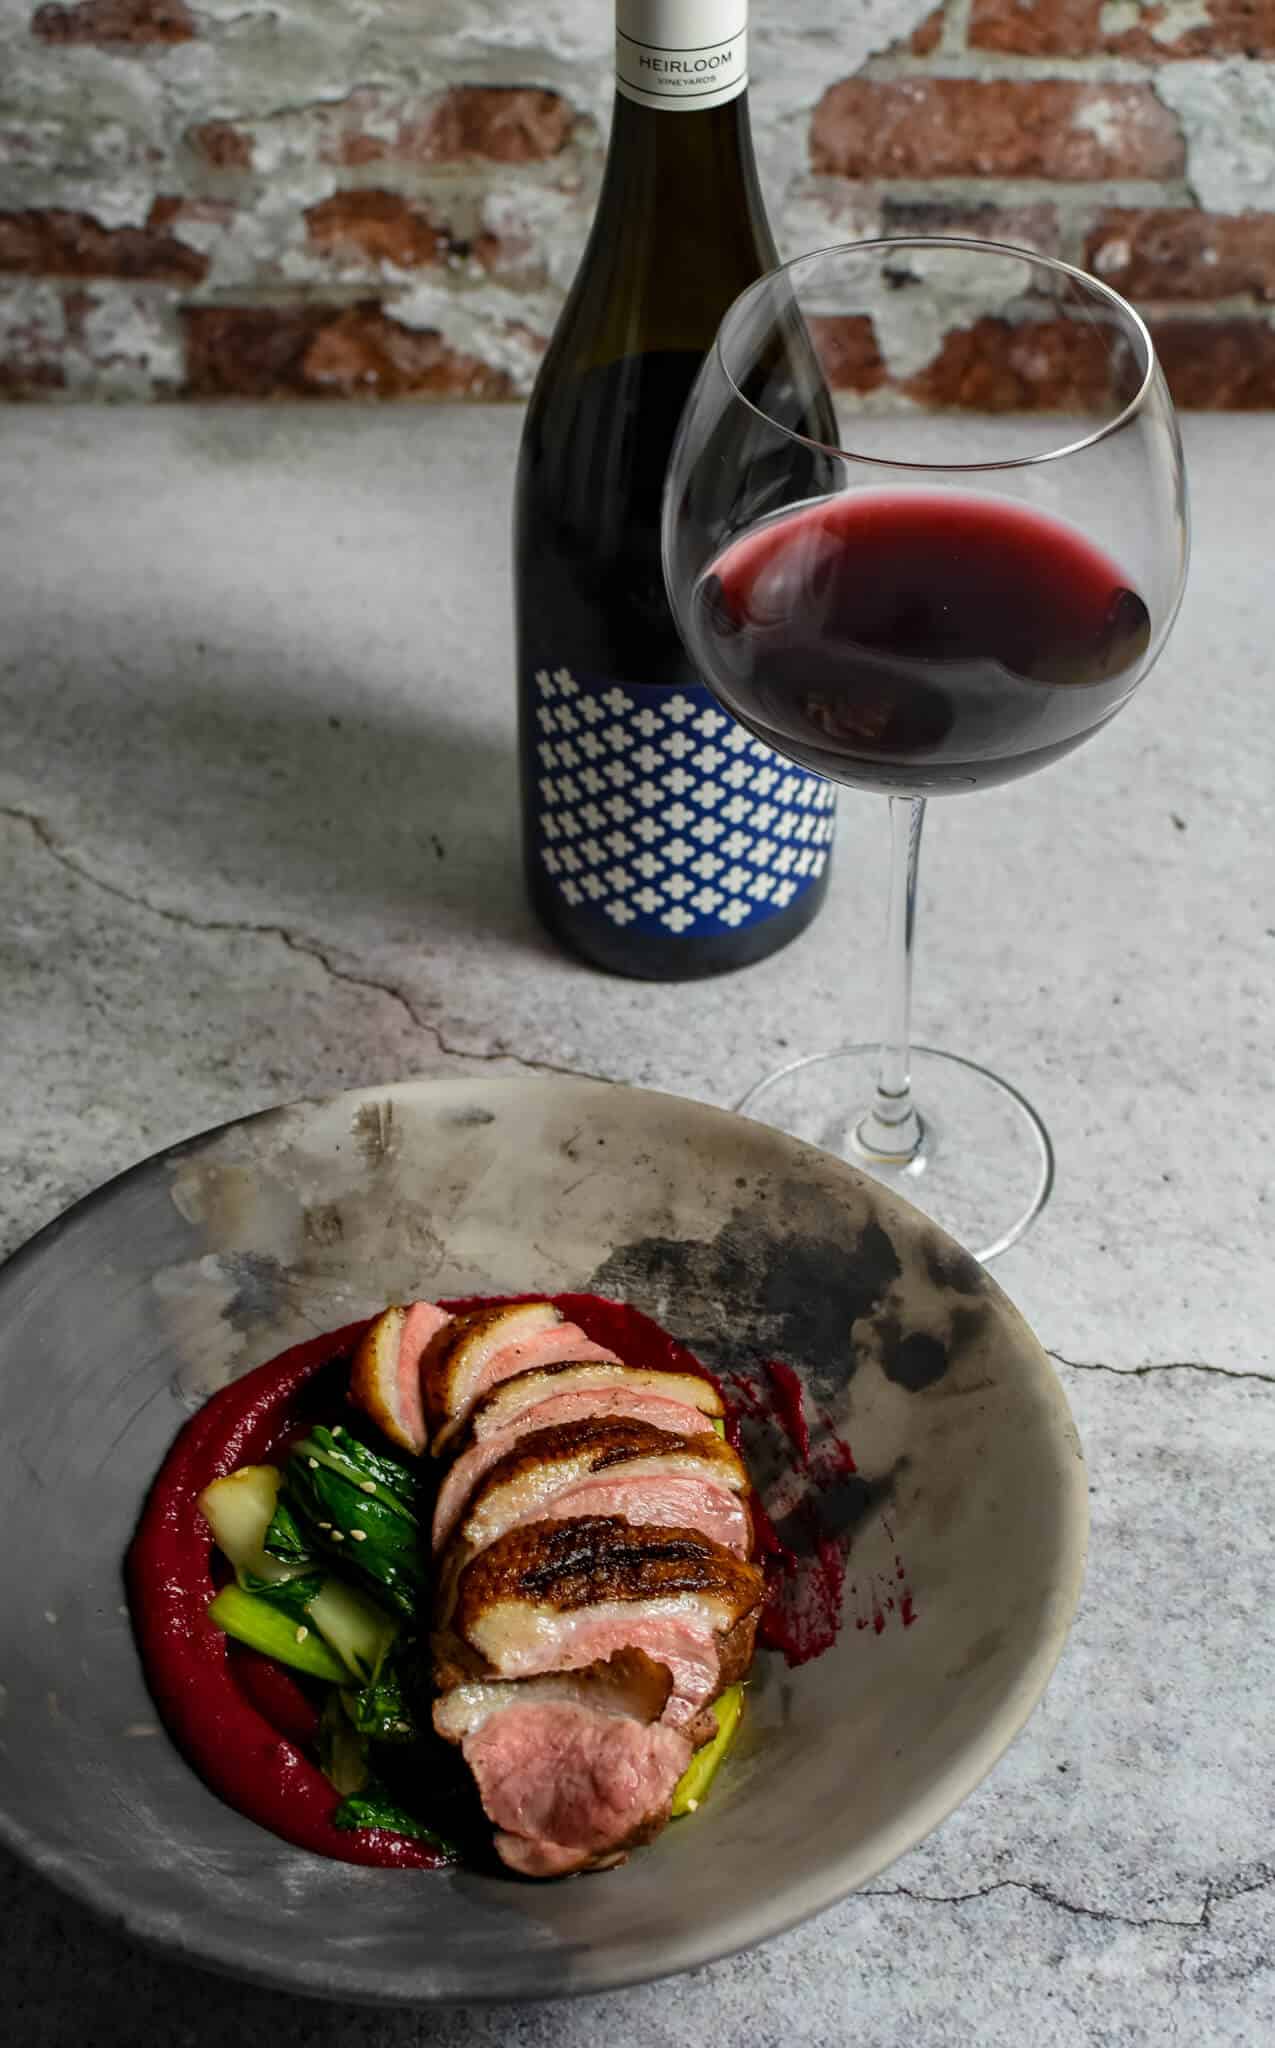 Duck breast, rhubarb ketchup & asian greens in a made of australia bowl on a table with heirloom pinot noir